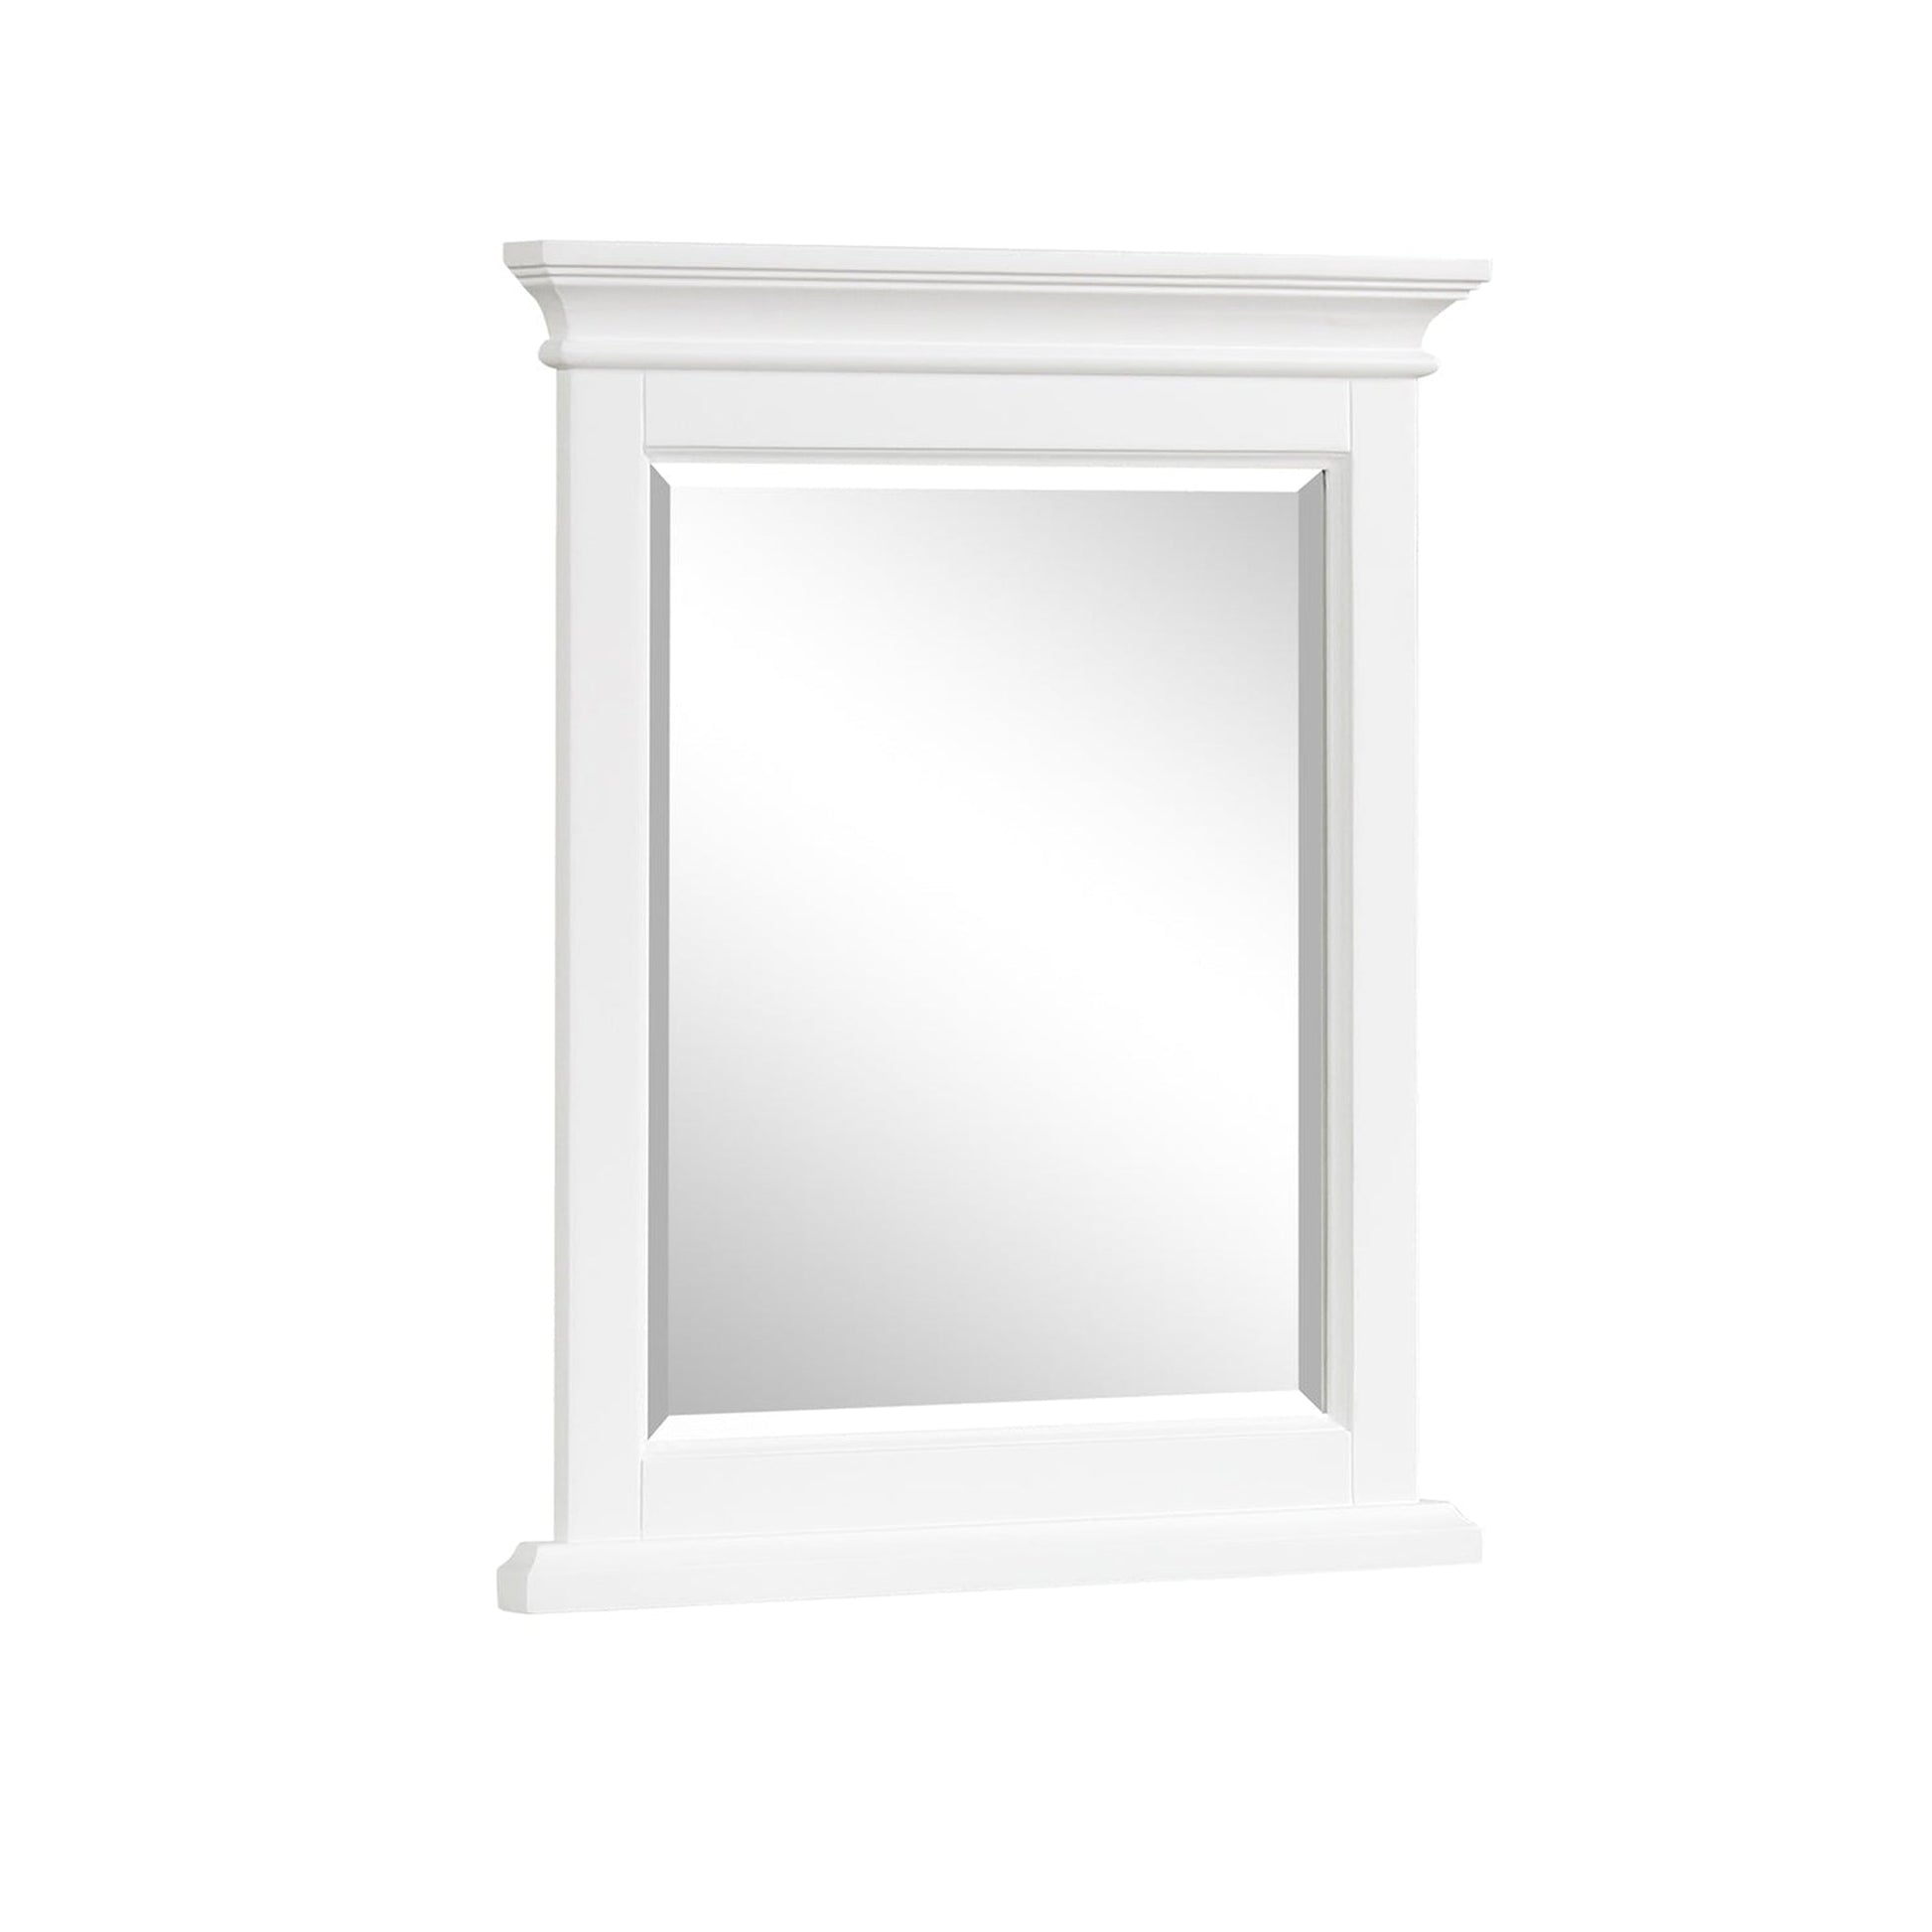 Eviva Britney 24" x 30" White Transitional Bathroom Wall-Mounted Mirror